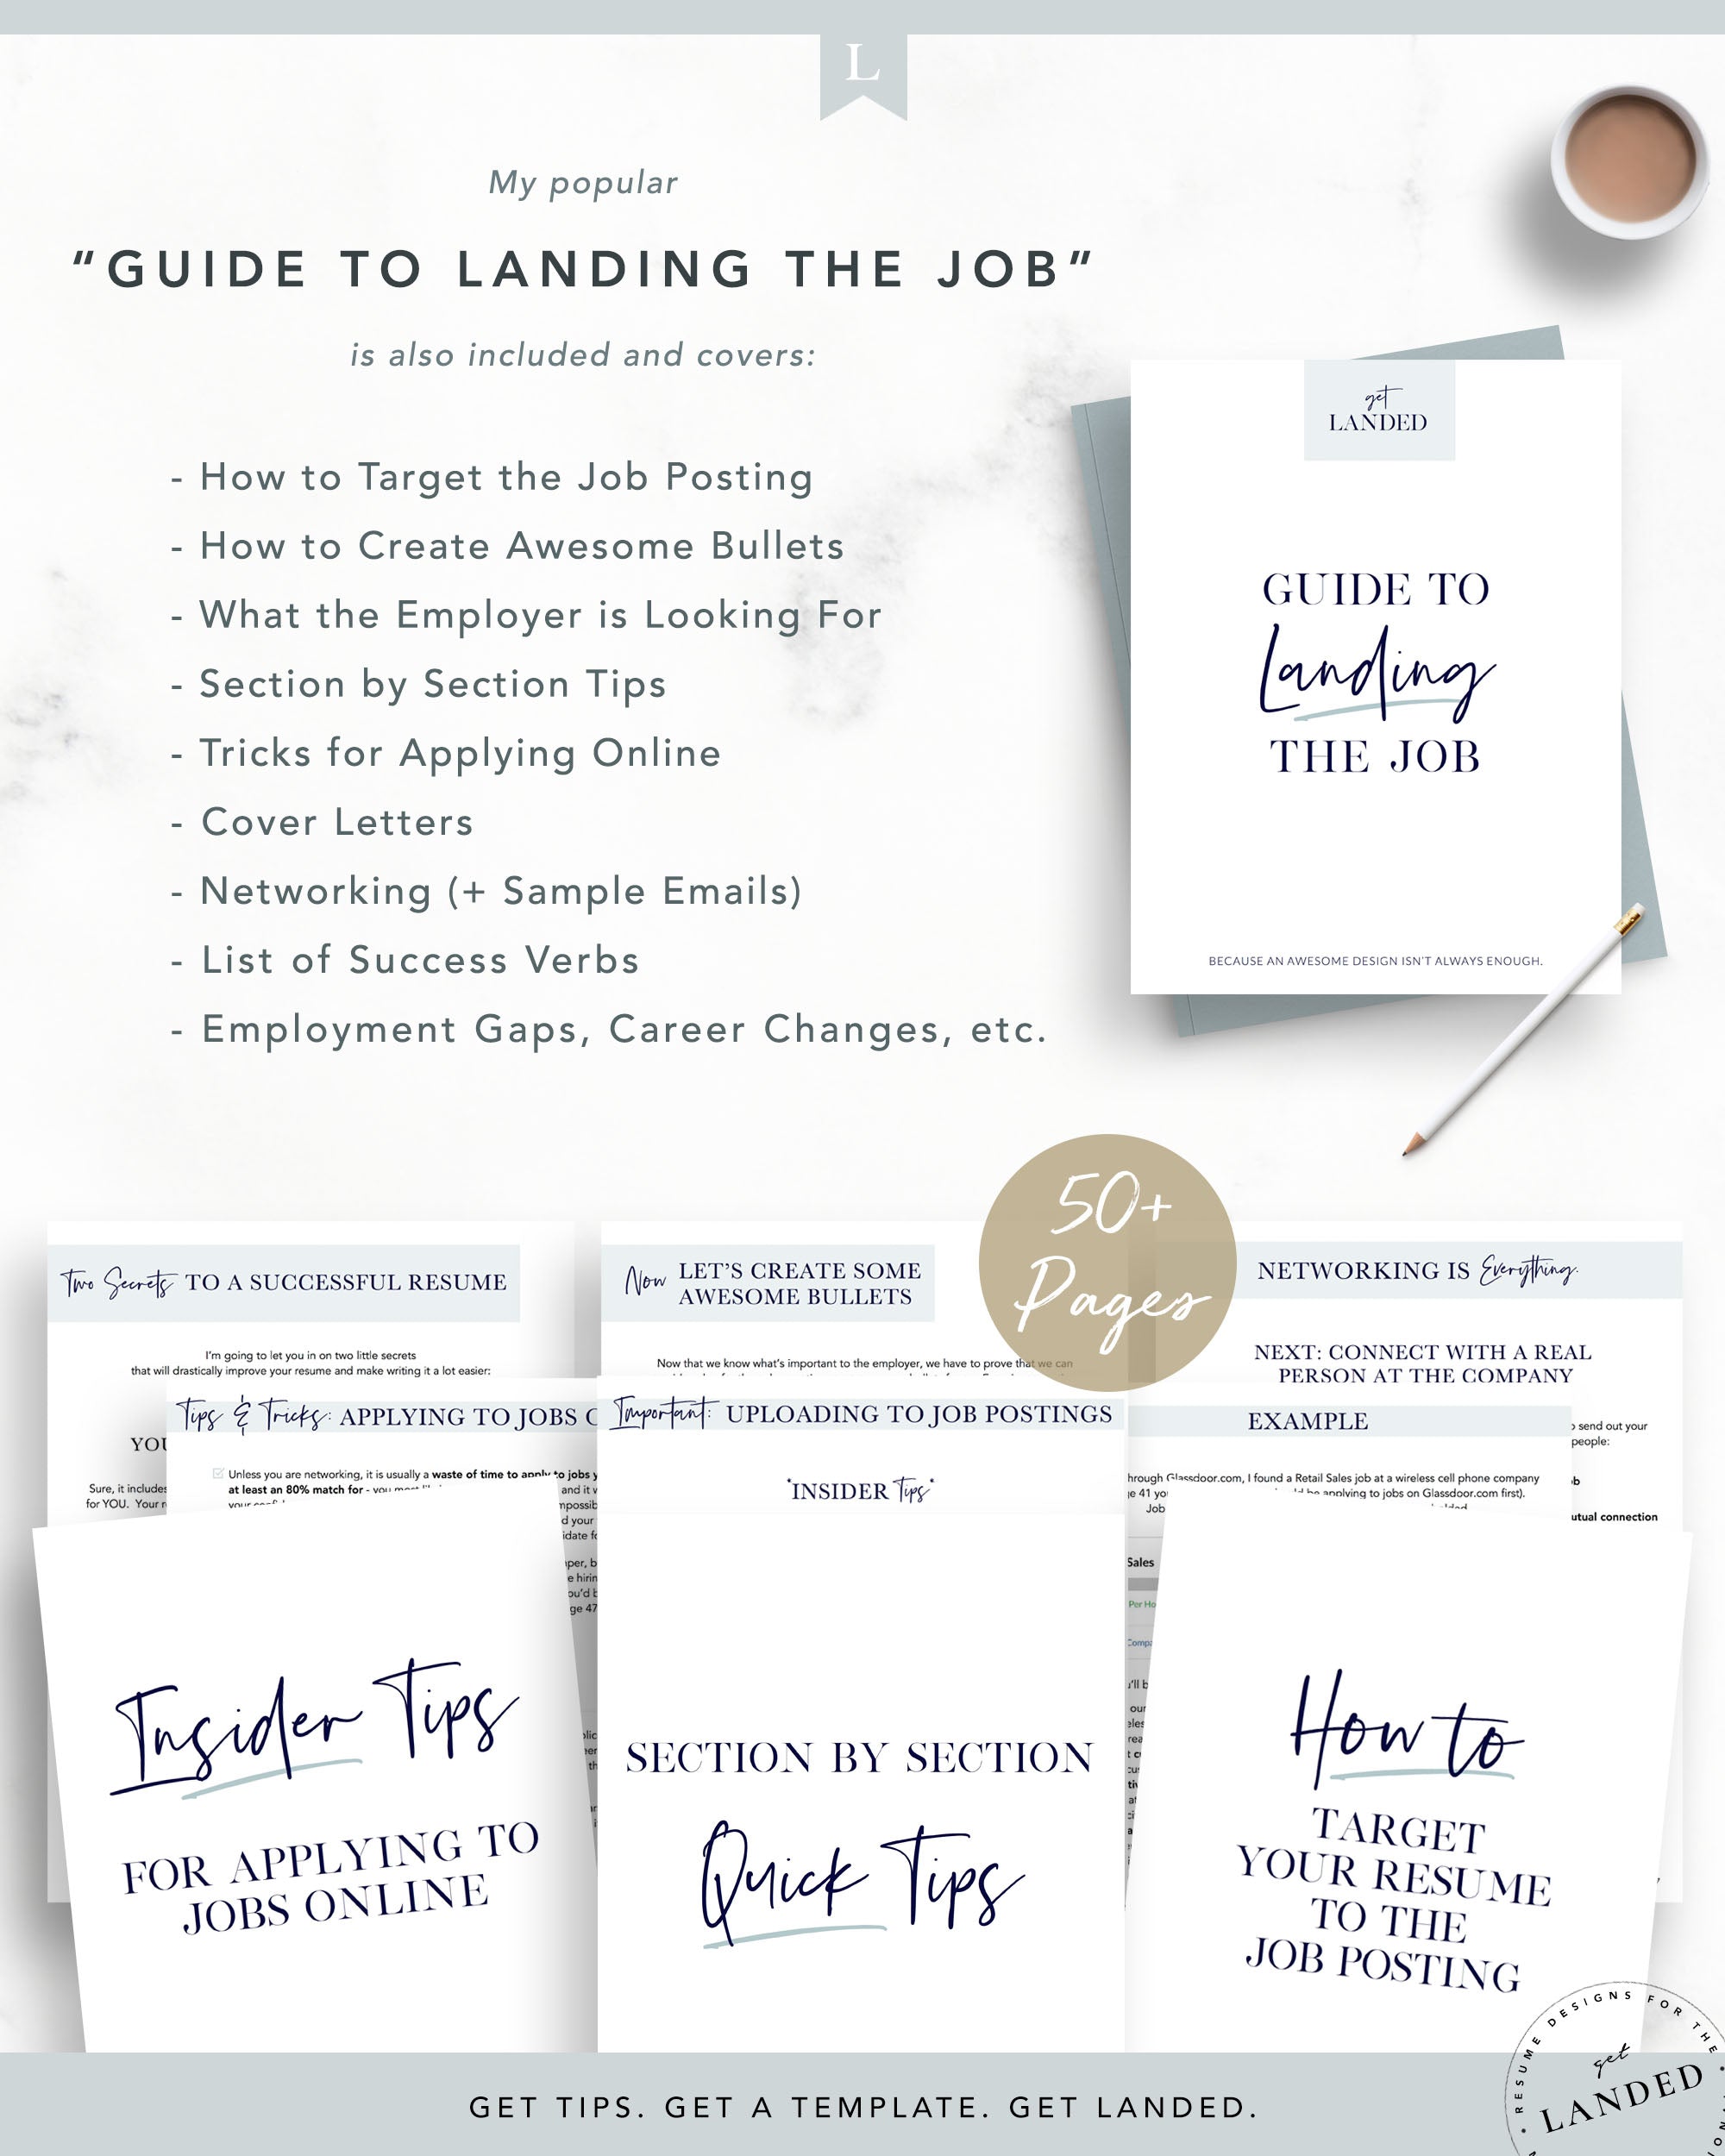 Professional Resume Template for Word and Pages | The Landon